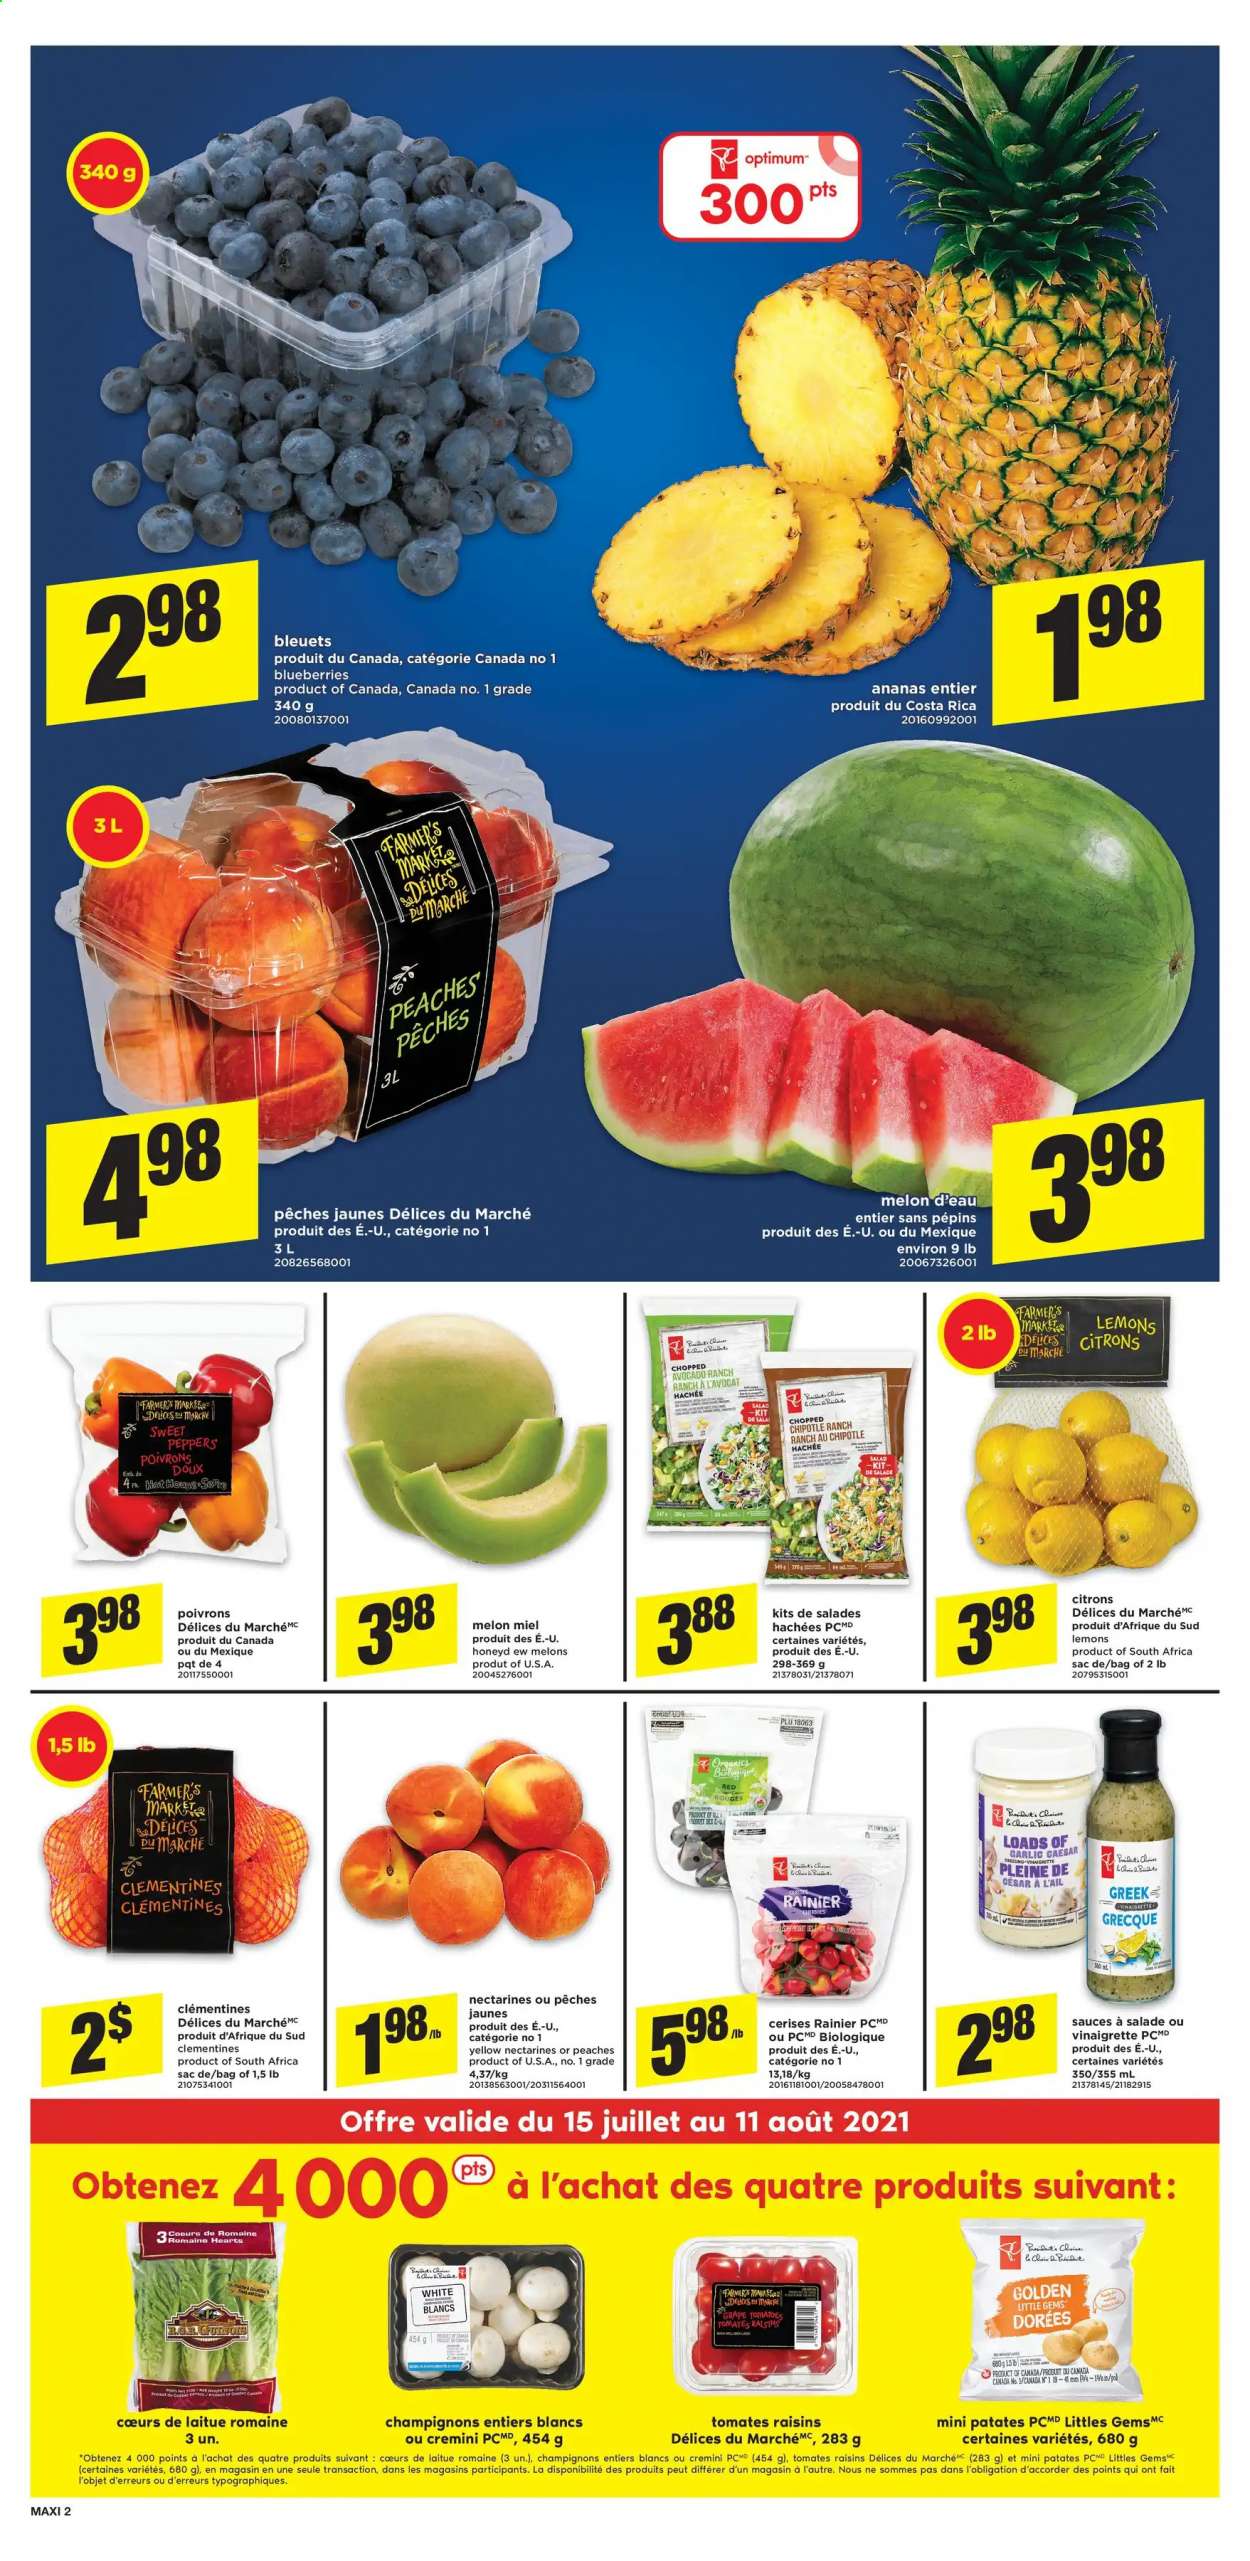 thumbnail - Maxi Flyer - July 15, 2021 - July 21, 2021 - Sales products - sweet peppers, tomatoes, salad, peppers, avocado, blueberries, clementines, nectarines, melons, lemons, peaches, vinaigrette dressing, dried fruit, raisins. Page 4.